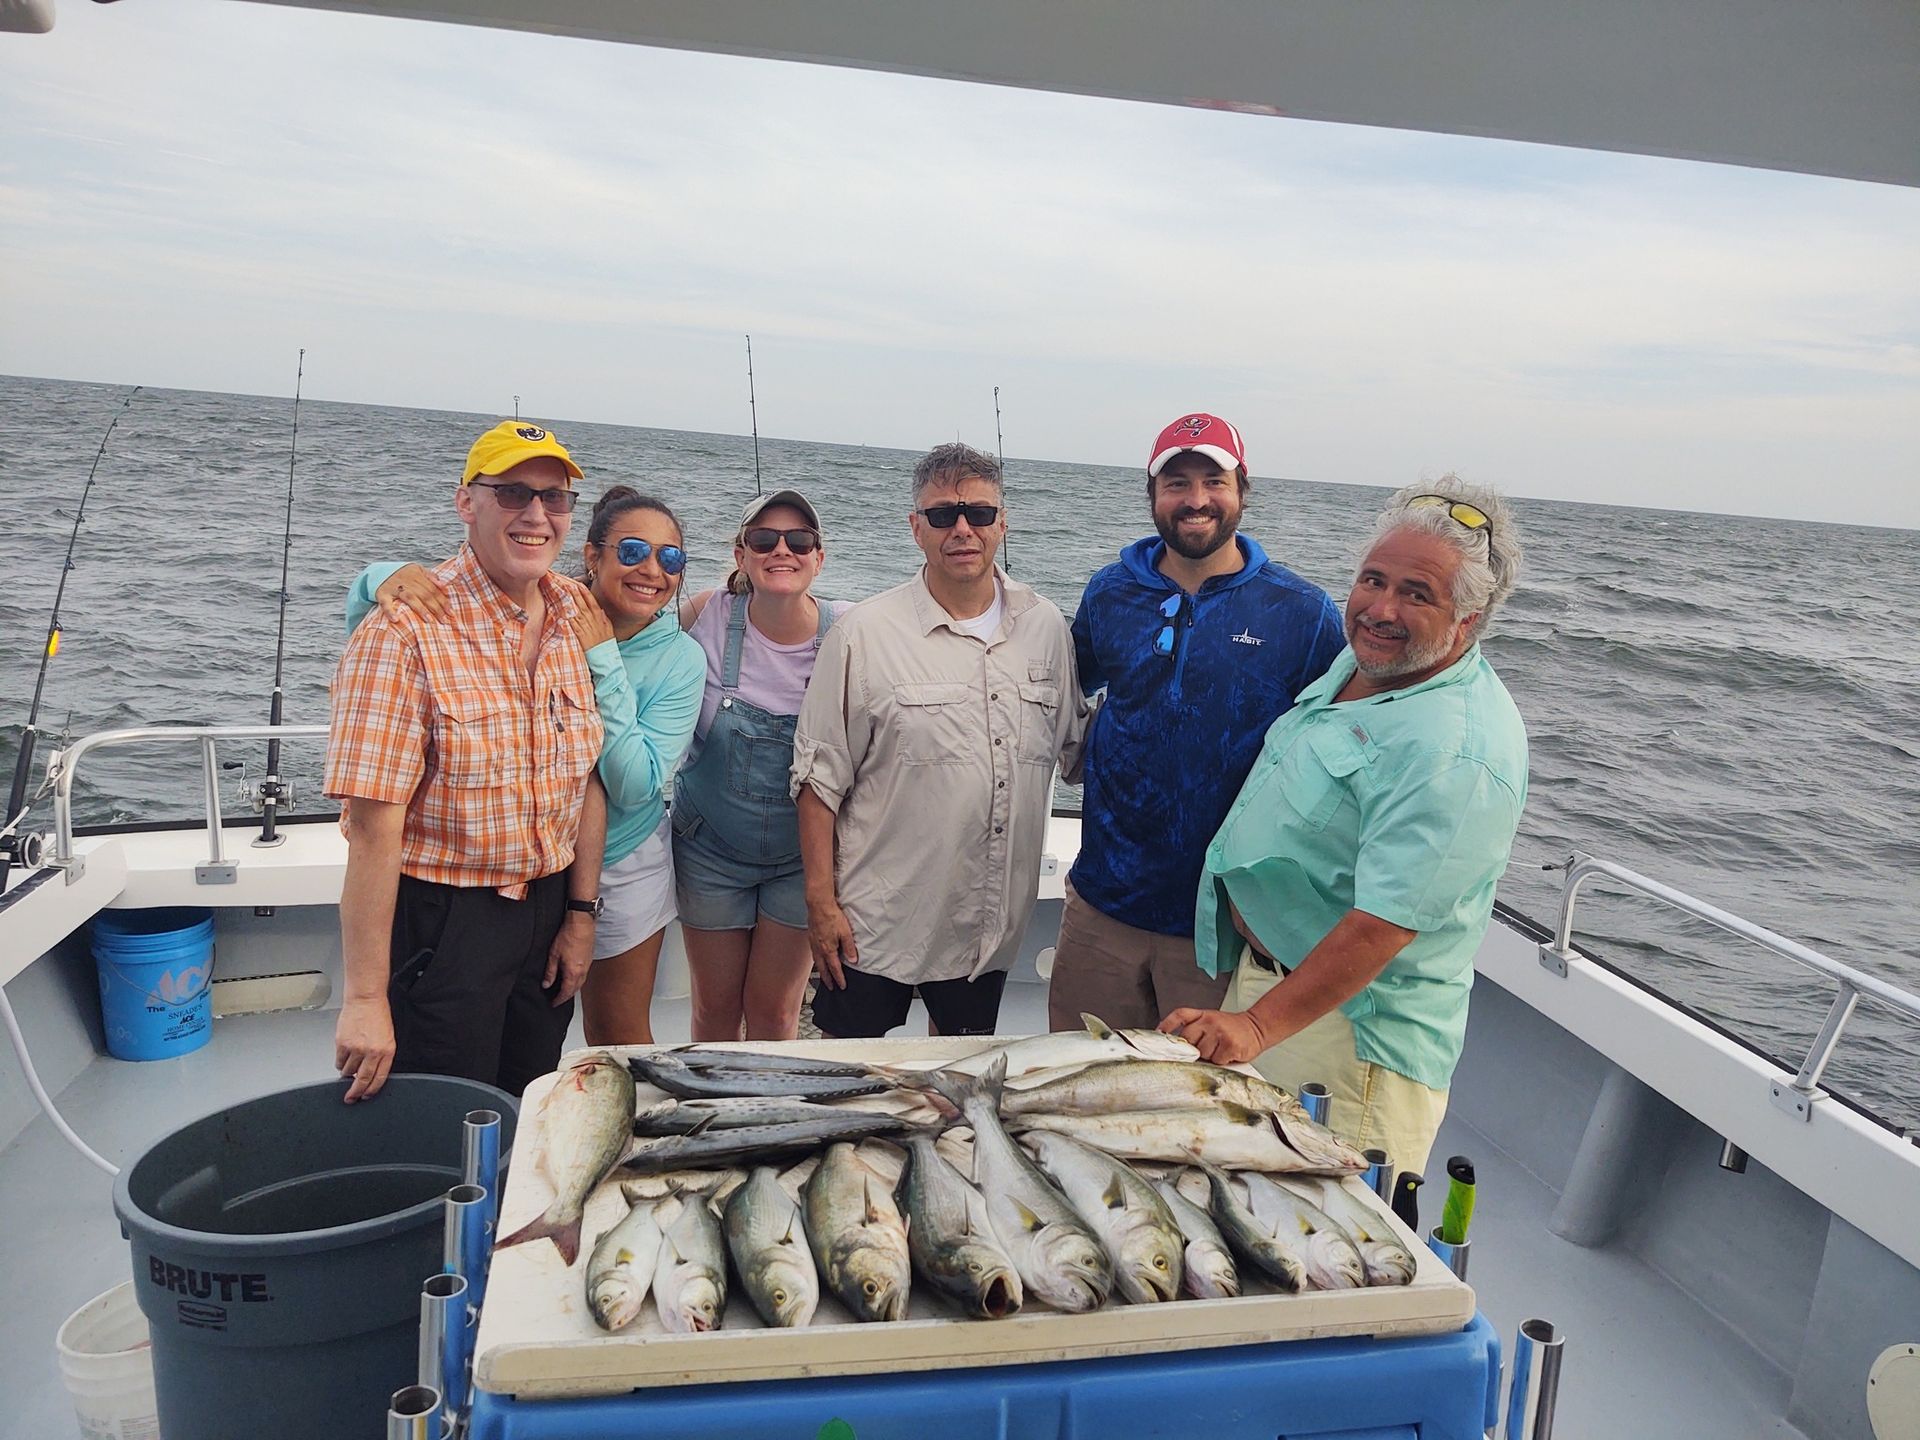 A group of people are standing on a boat with a cooler full of fish.